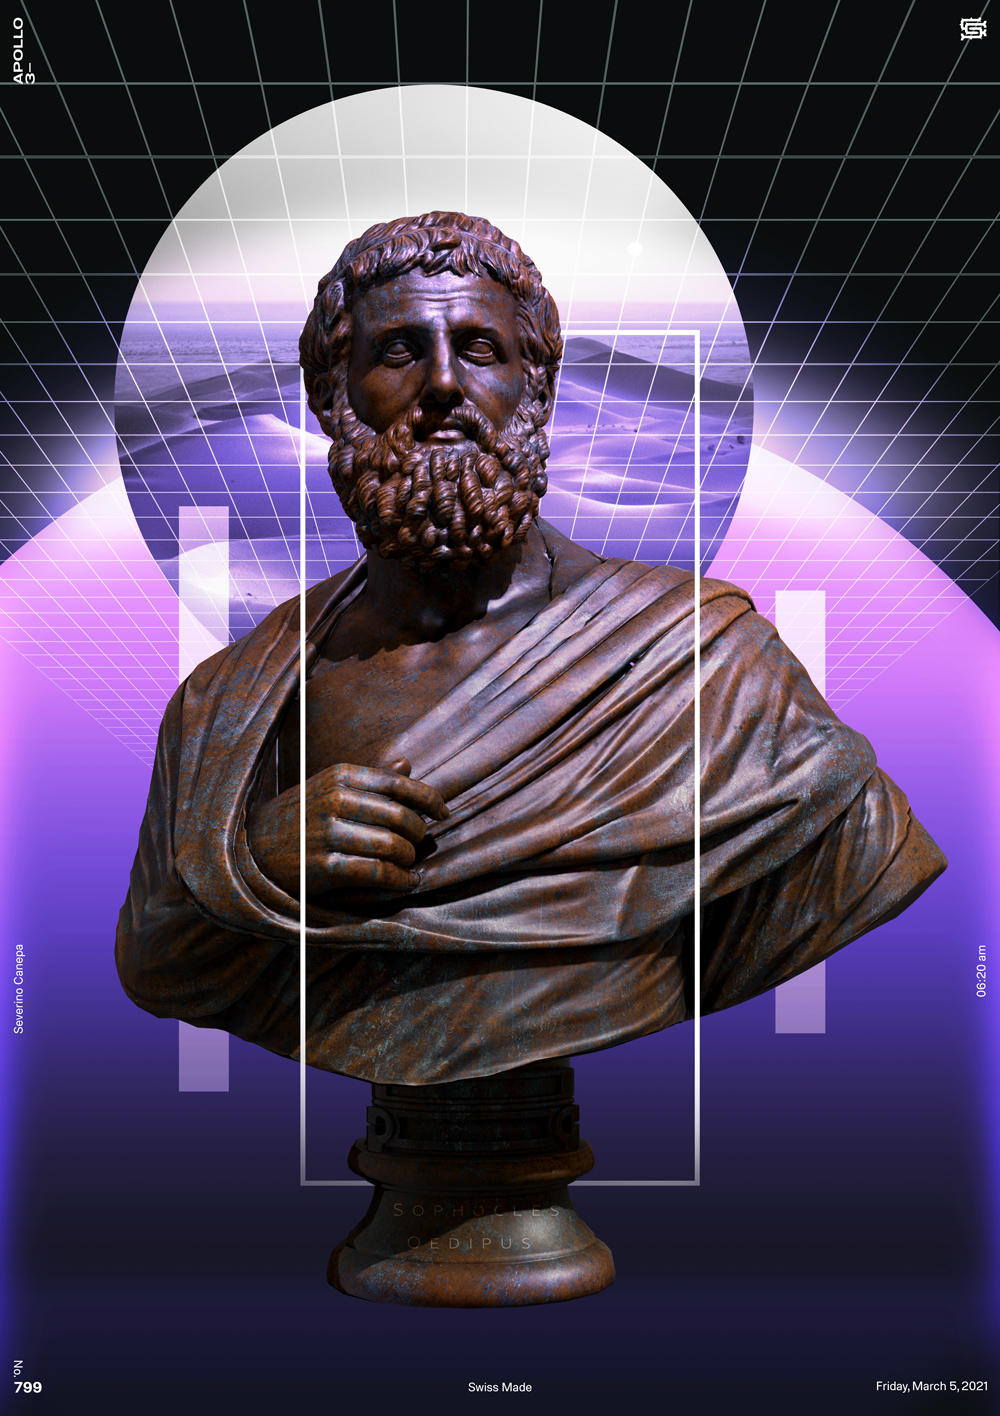 Vaporwave creation made with the 3D render of Sophocles and Photoshop effects